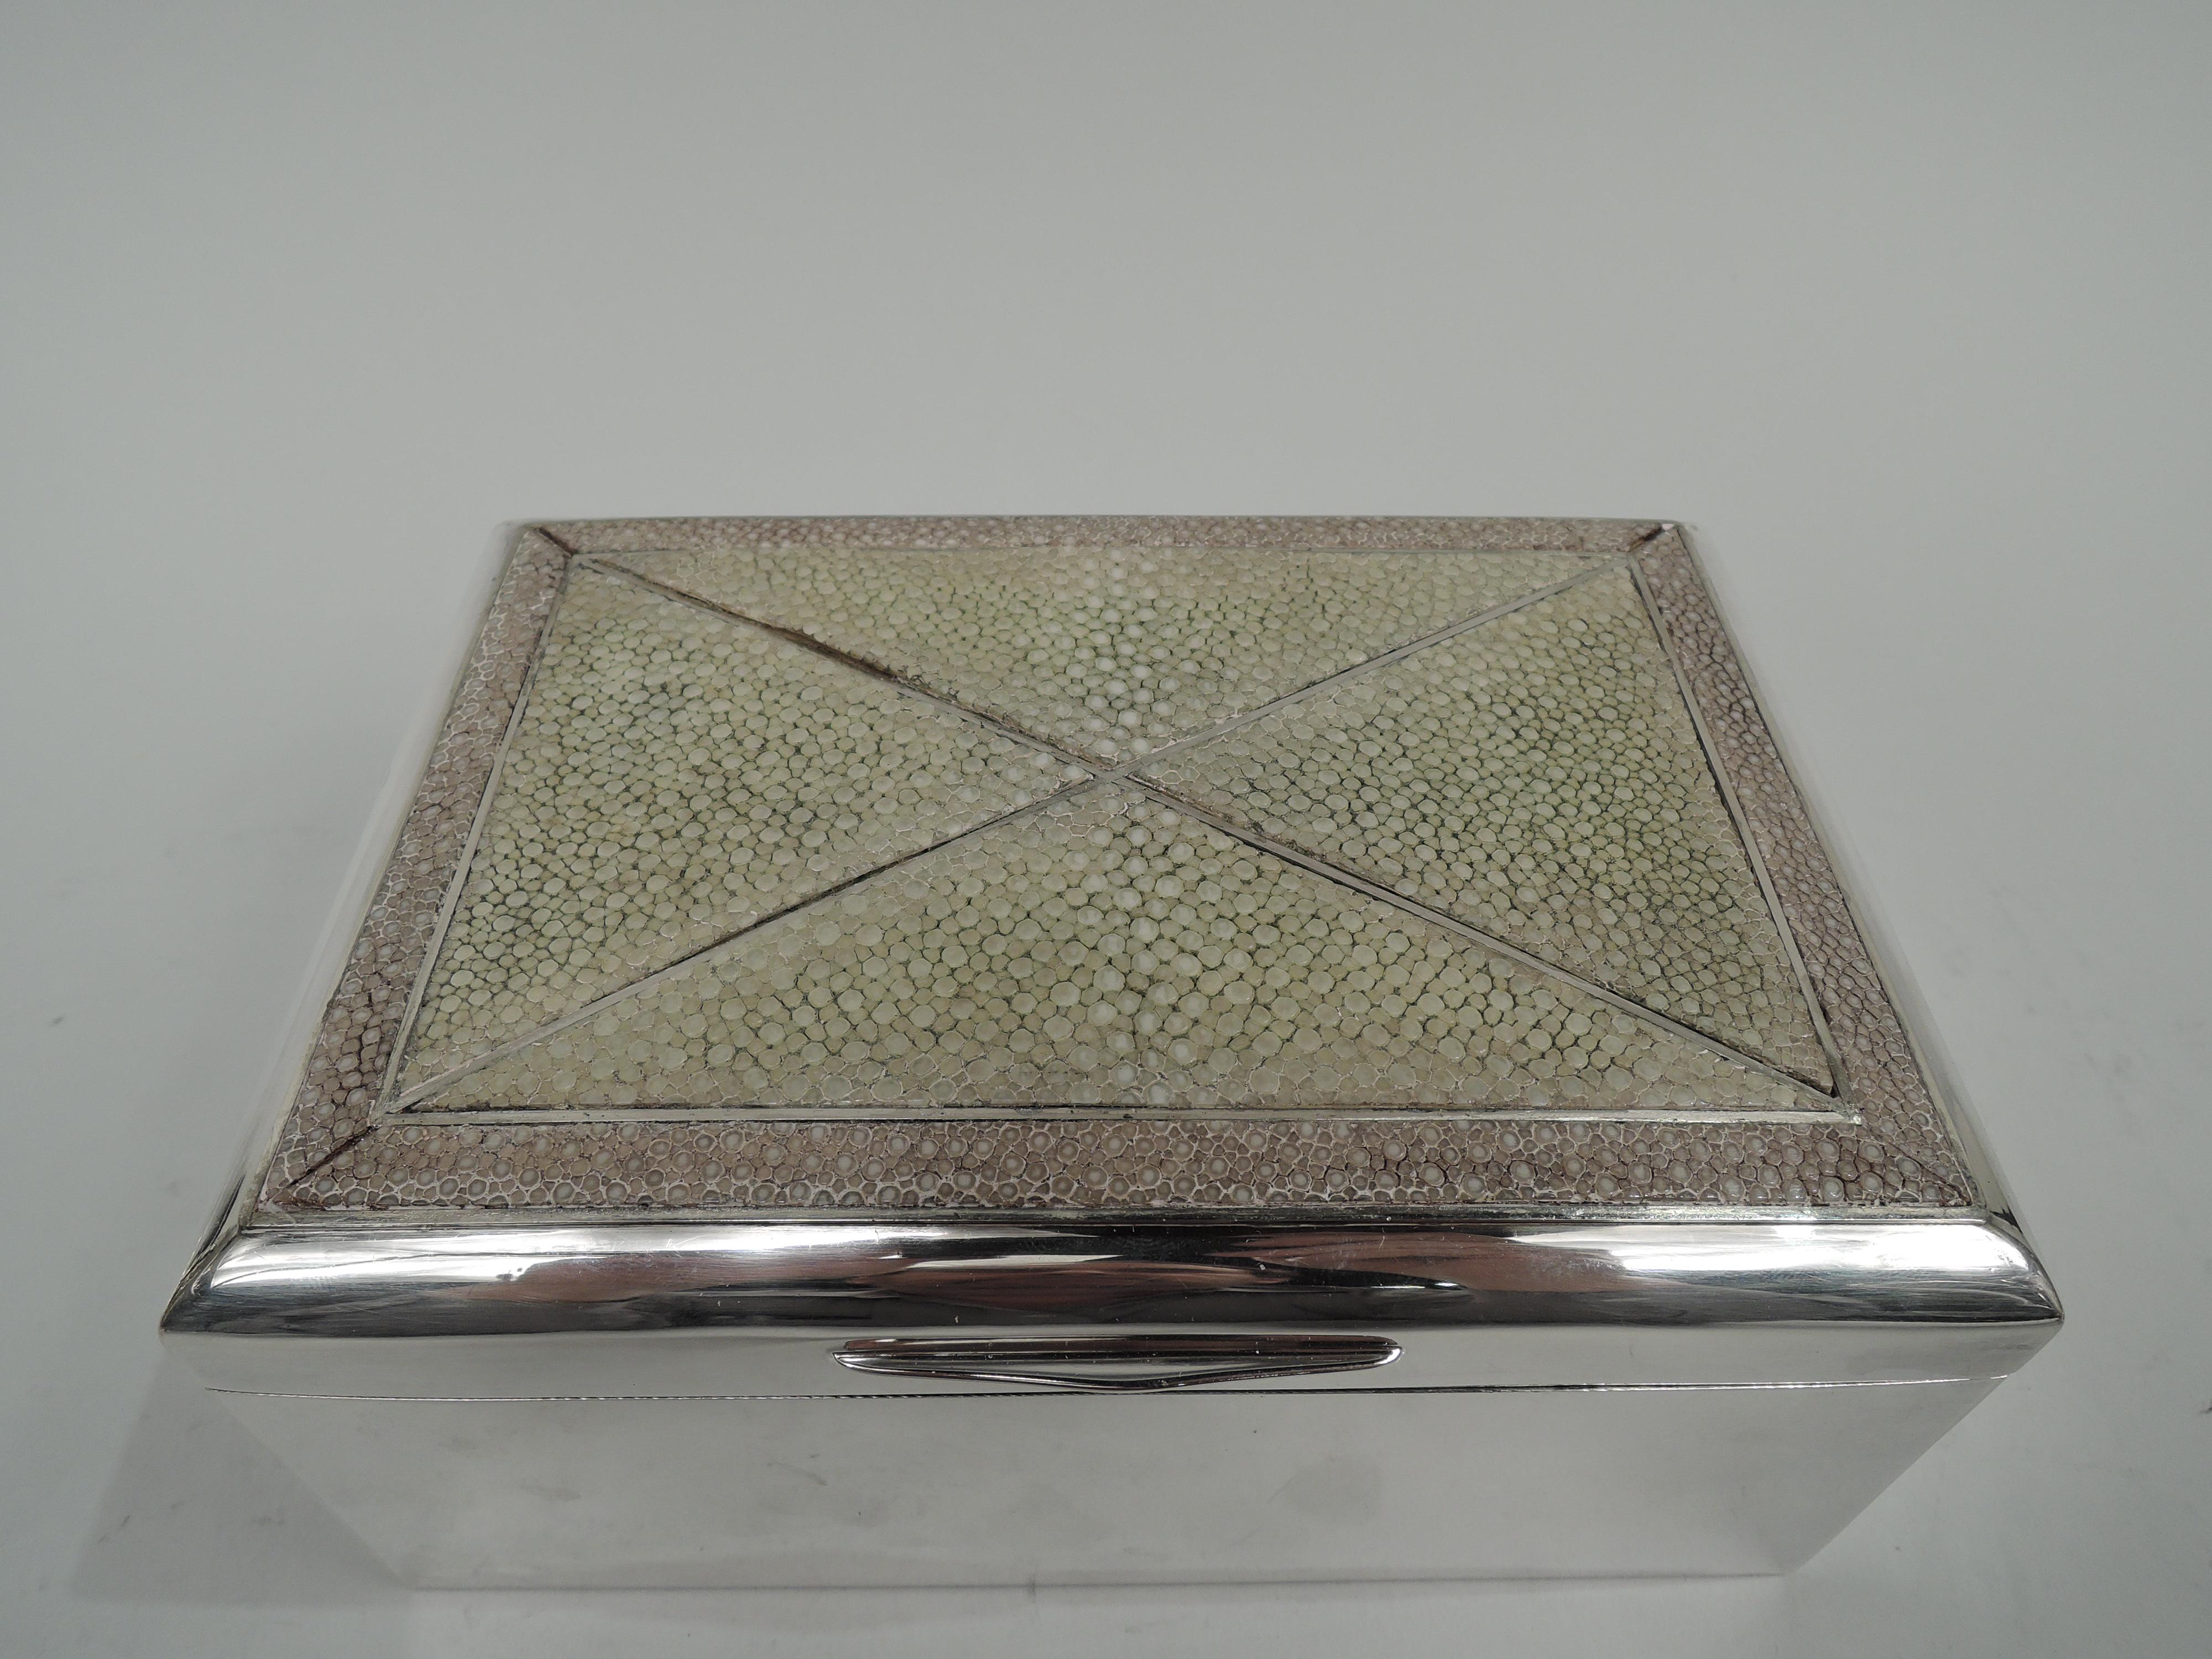 German Modern 800 silver box, ca 1920. Rectangular with straight sides and crisp corners. Cover hinged with tapering tab; cover top gently curved and inlaid with shagreen in geometric pattern. Cedar-lined interior. Open leather-lined bottom. Marks